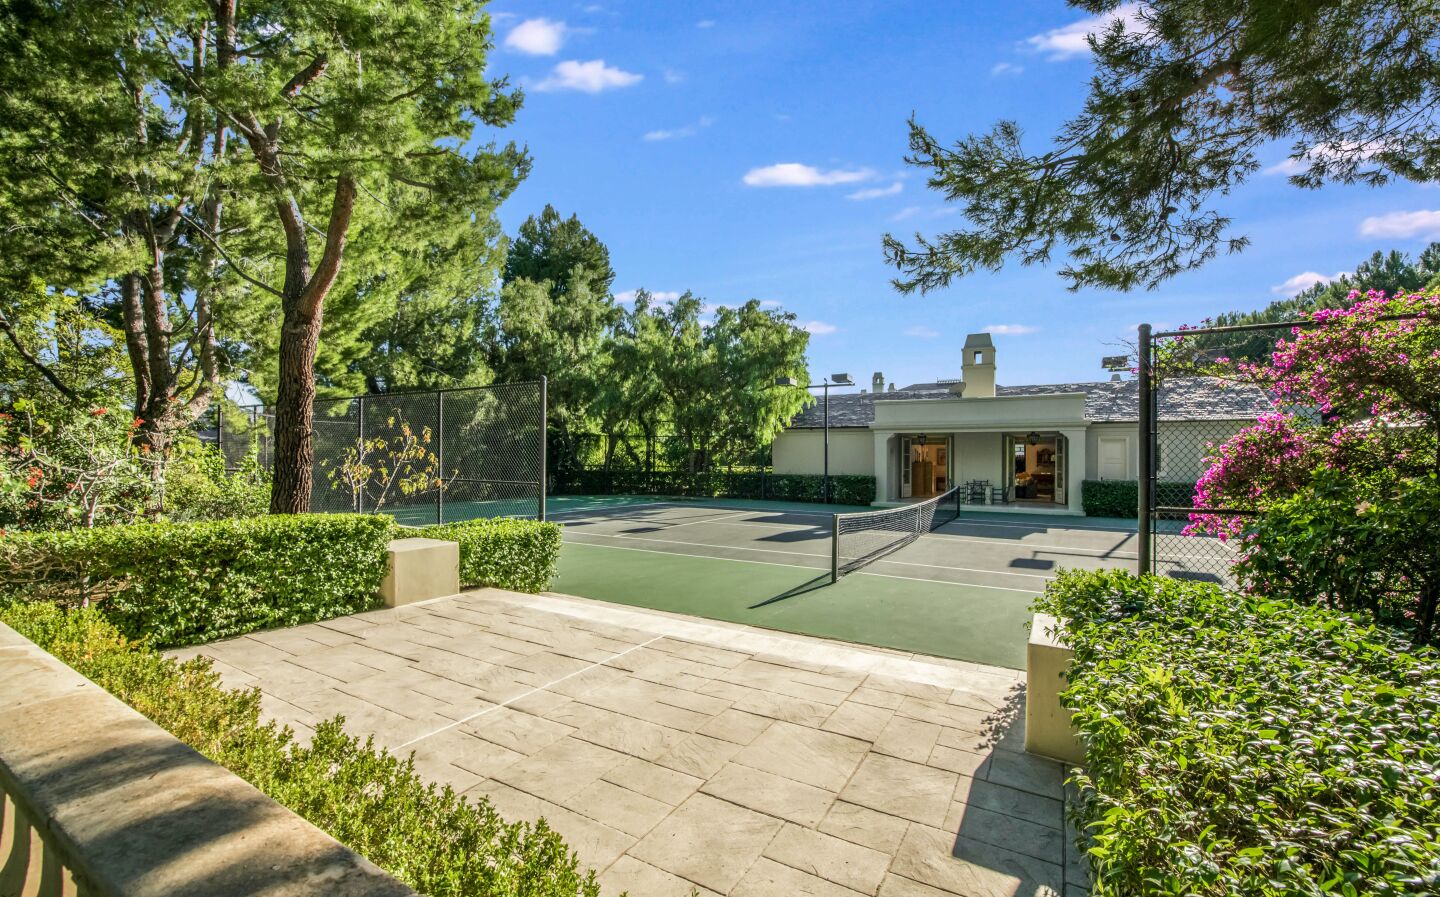 The tennis court is next to the home and greenery.